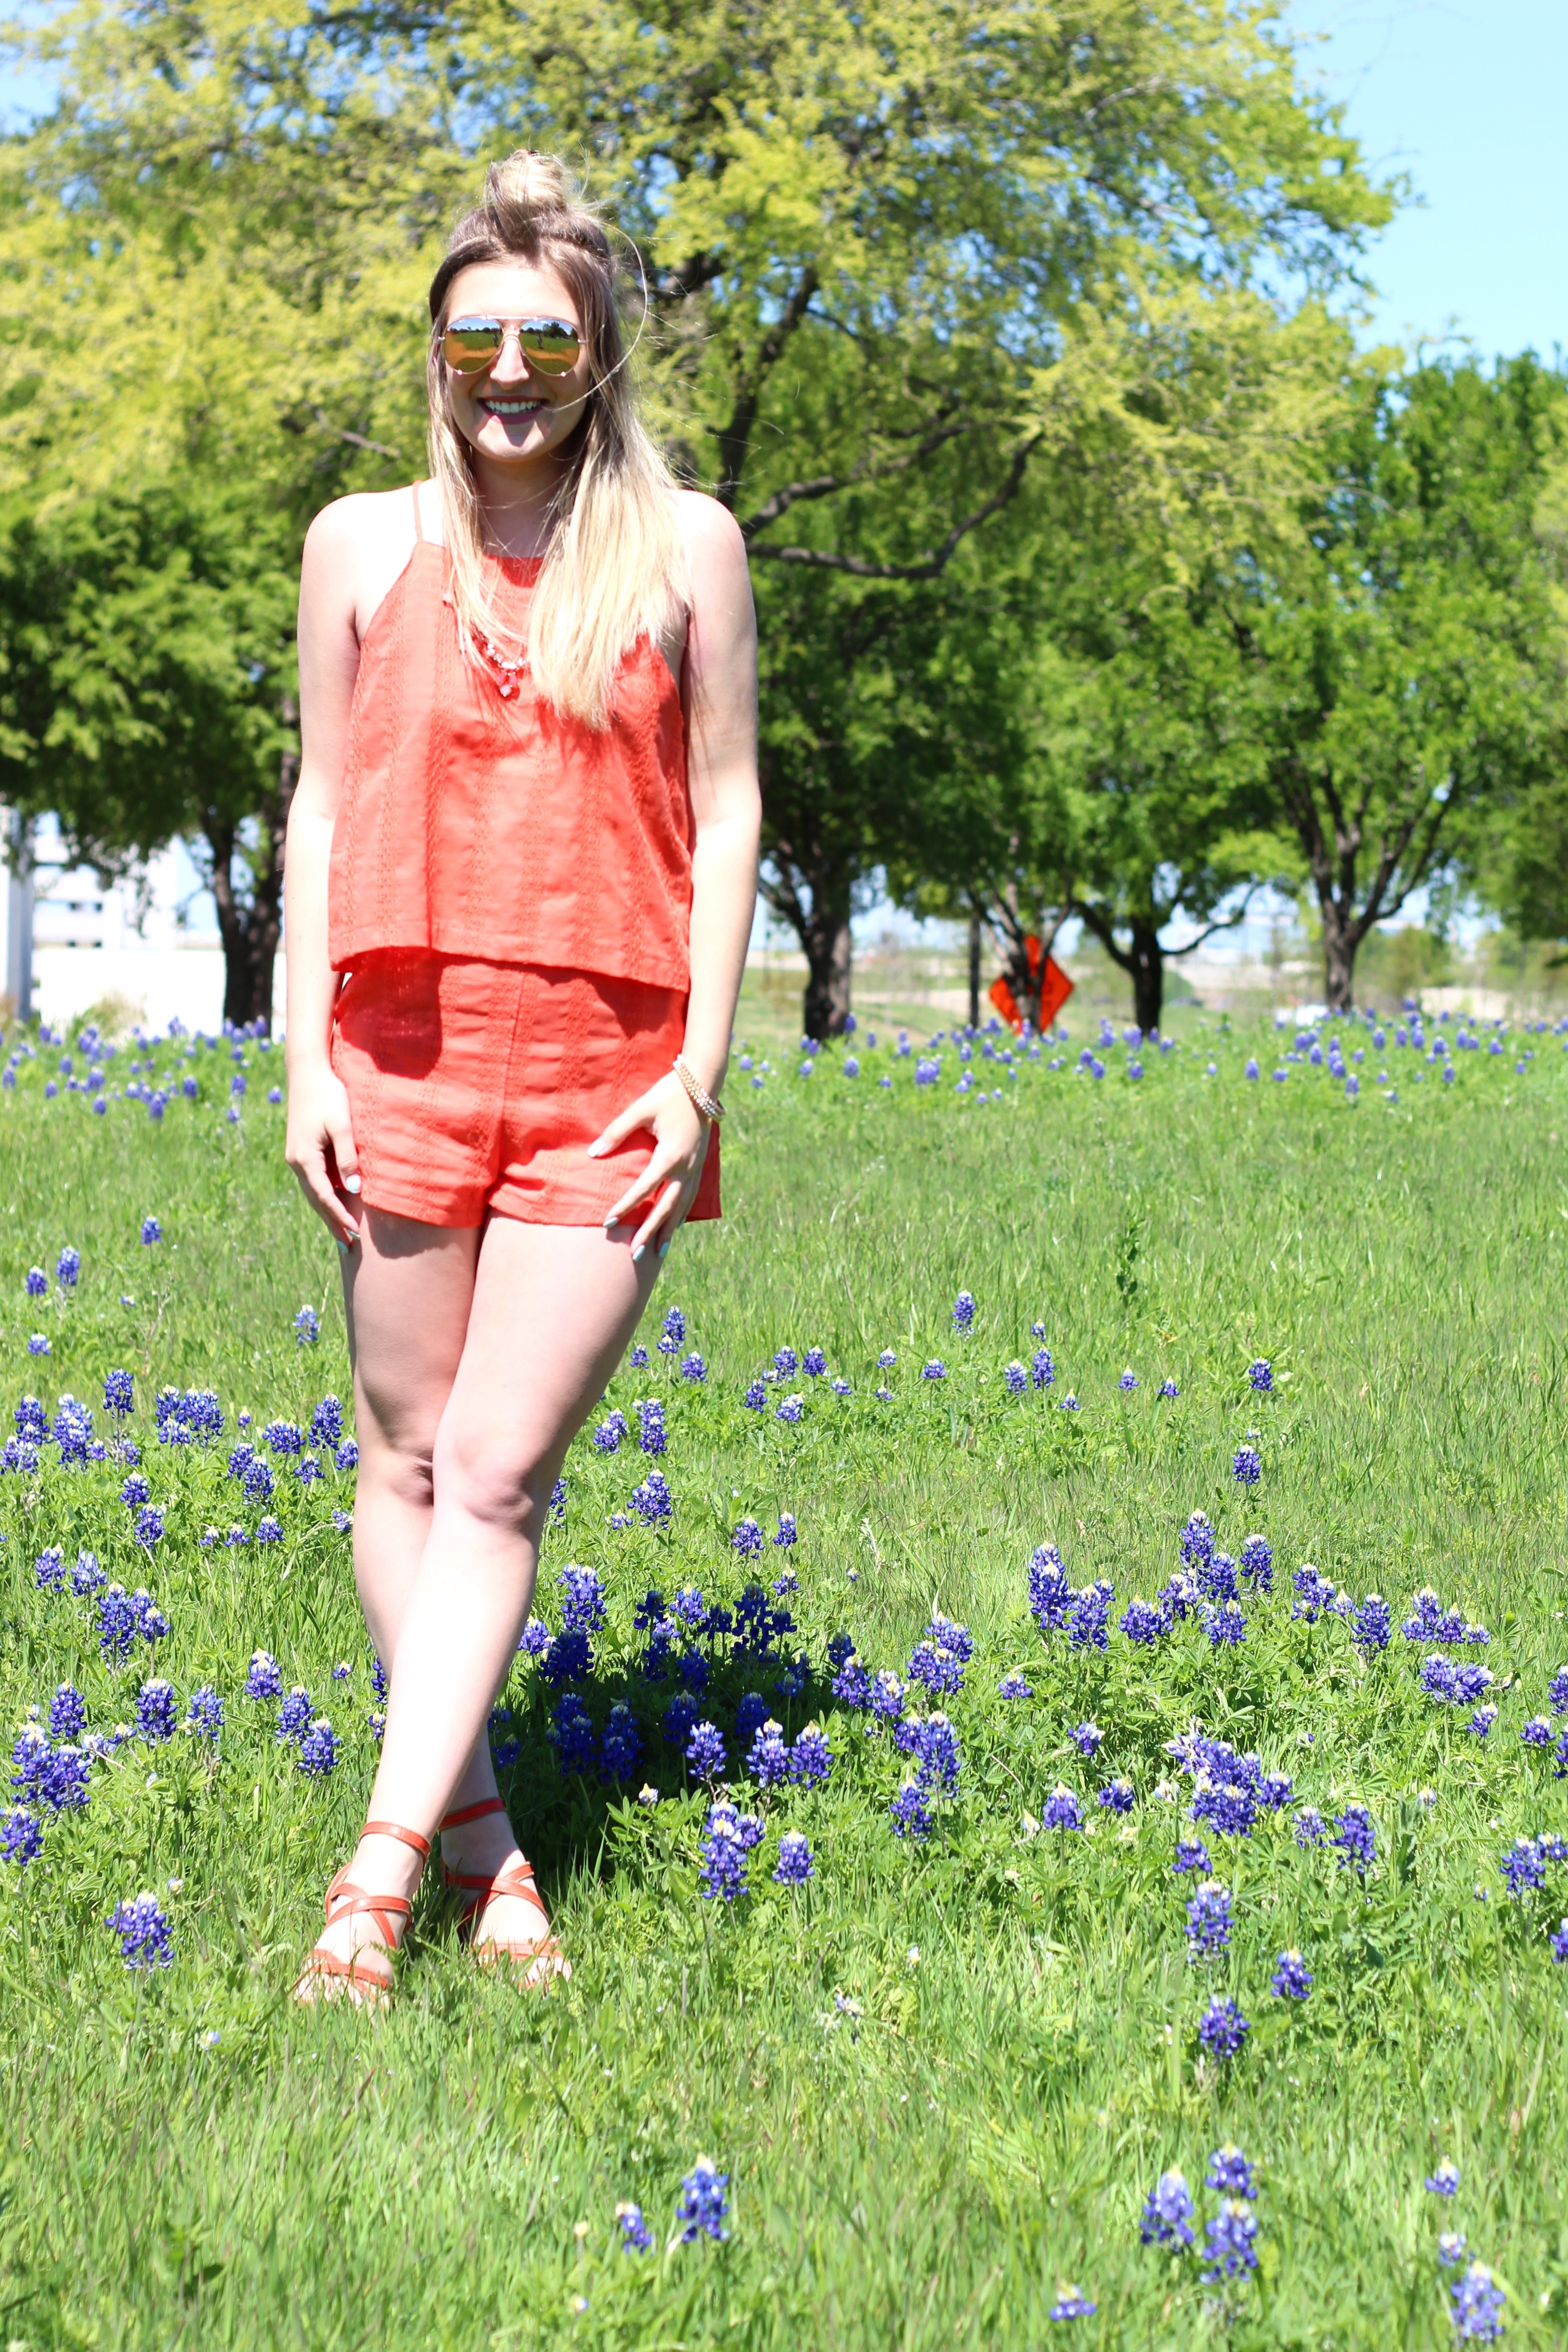 blue bonnets in texas in an orange outfit